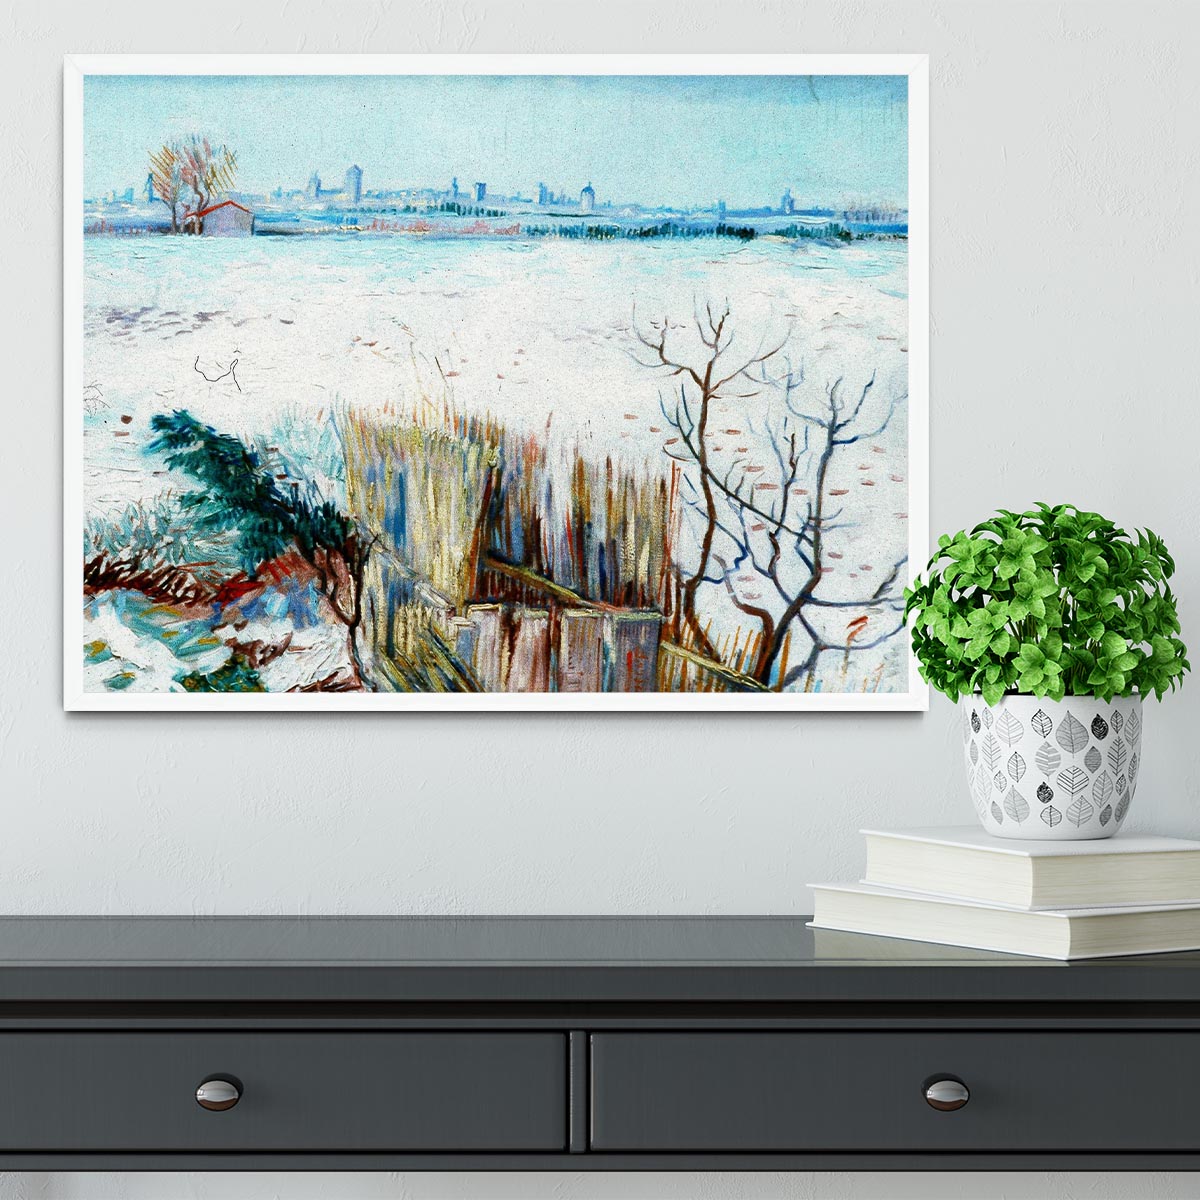 Snowy Landscape with Arles in the Background by Van Gogh Framed Print - Canvas Art Rocks -6